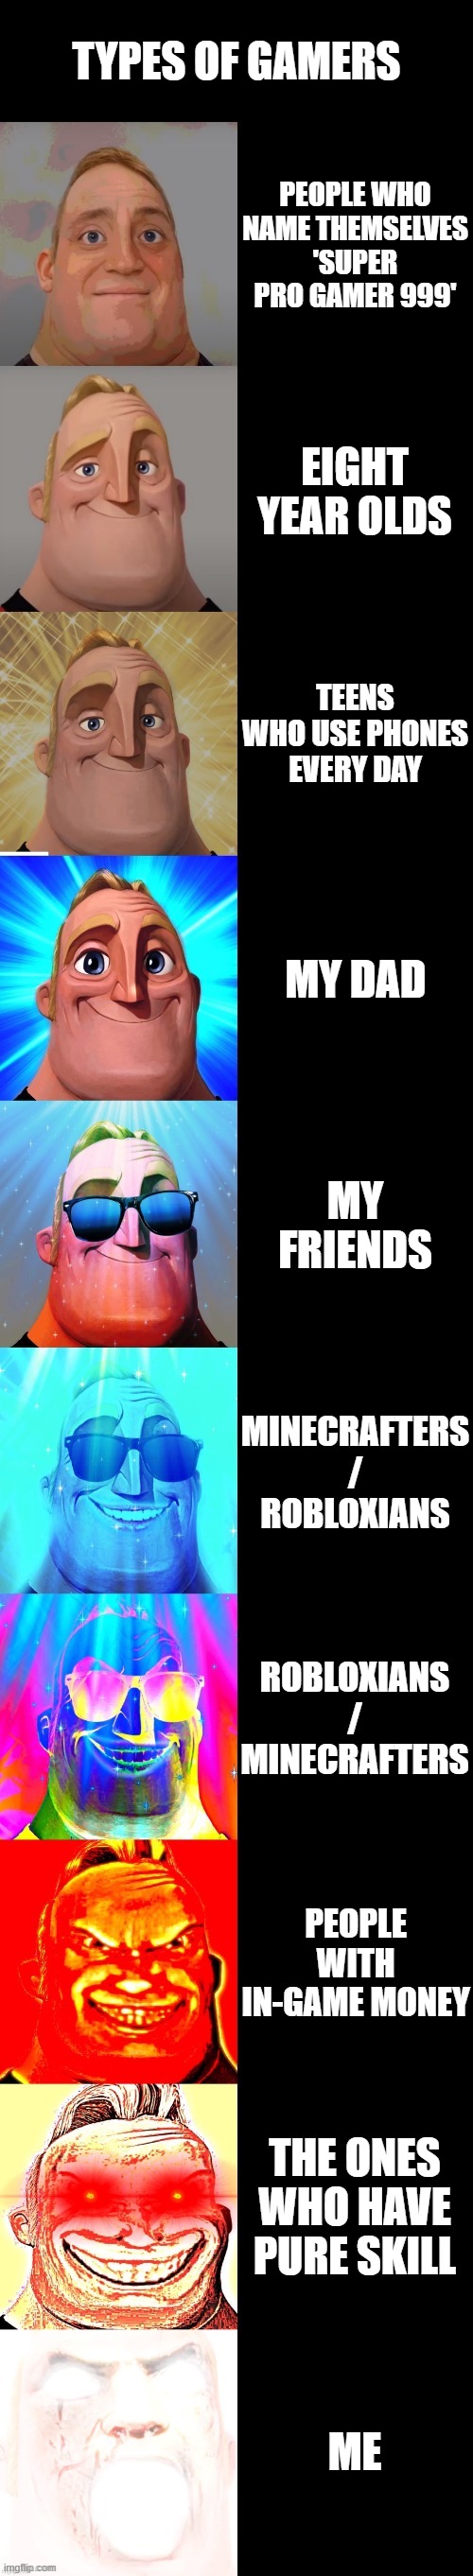 gamers | TYPES OF GAMERS; PEOPLE WHO NAME THEMSELVES 'SUPER PRO GAMER 999'; EIGHT YEAR OLDS; TEENS WHO USE PHONES EVERY DAY; MY DAD; MY FRIENDS; MINECRAFTERS / ROBLOXIANS; ROBLOXIANS / MINECRAFTERS; PEOPLE WITH IN-GAME MONEY; THE ONES WHO HAVE PURE SKILL; ME | image tagged in mr incredible becoming canny | made w/ Imgflip meme maker